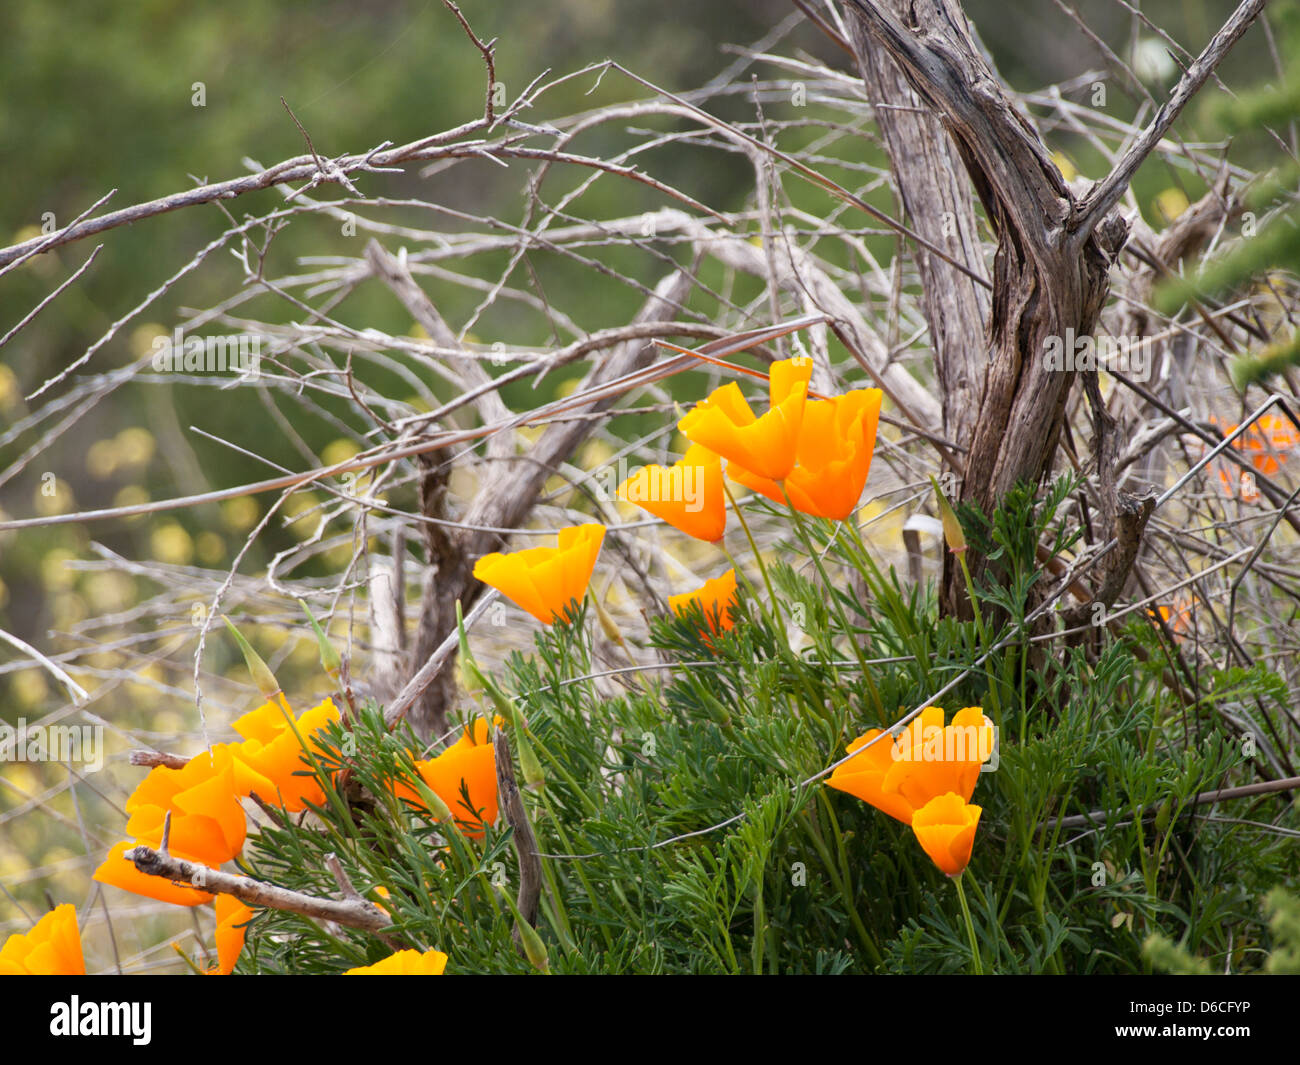 Eschscholzia californica ,California poppy an introduced species in Tenerife Spain livening up the mountainside Stock Photo